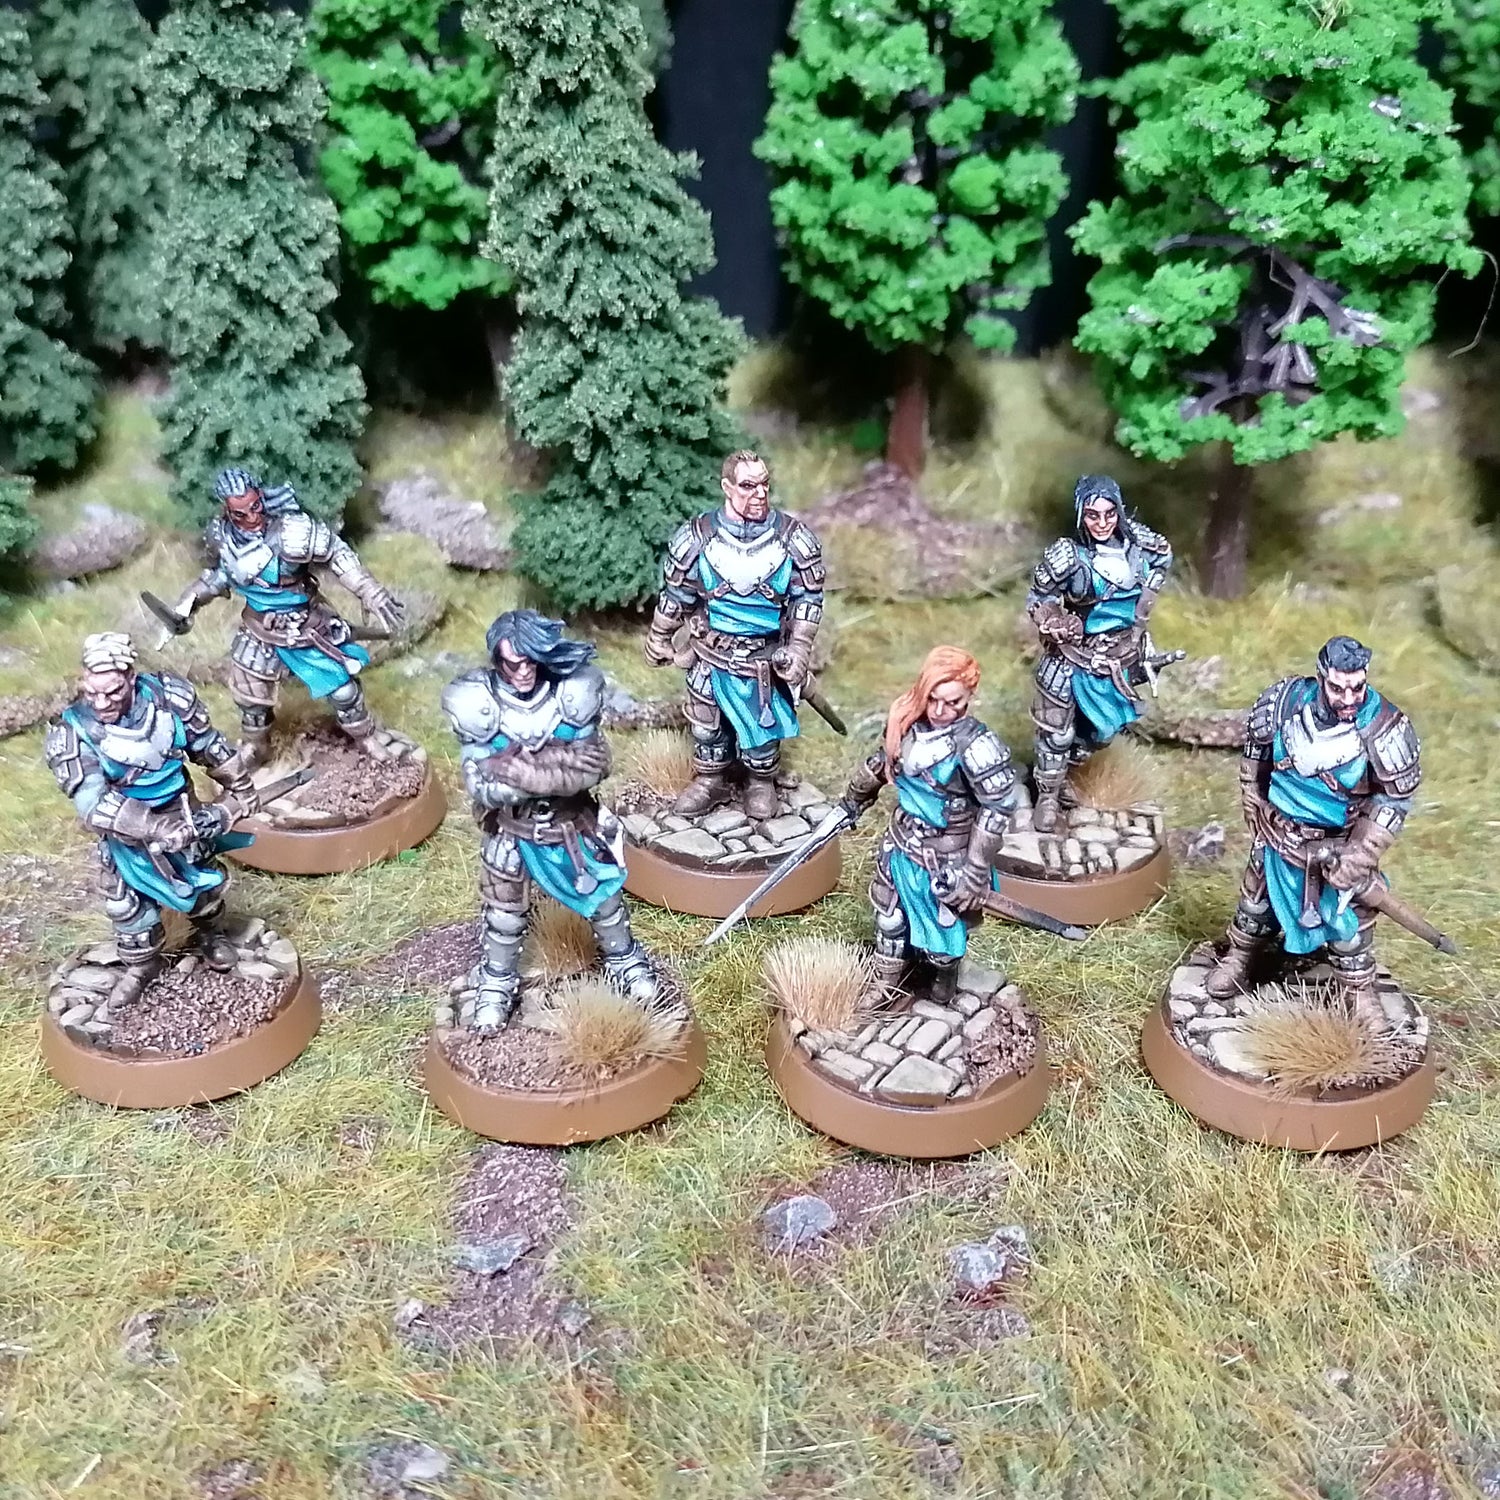 Painted models of Captain Zed's Mercenary company used to represent Captain Zodge and his Flaming Fist Mercenary Retinue in Baldurs Gate